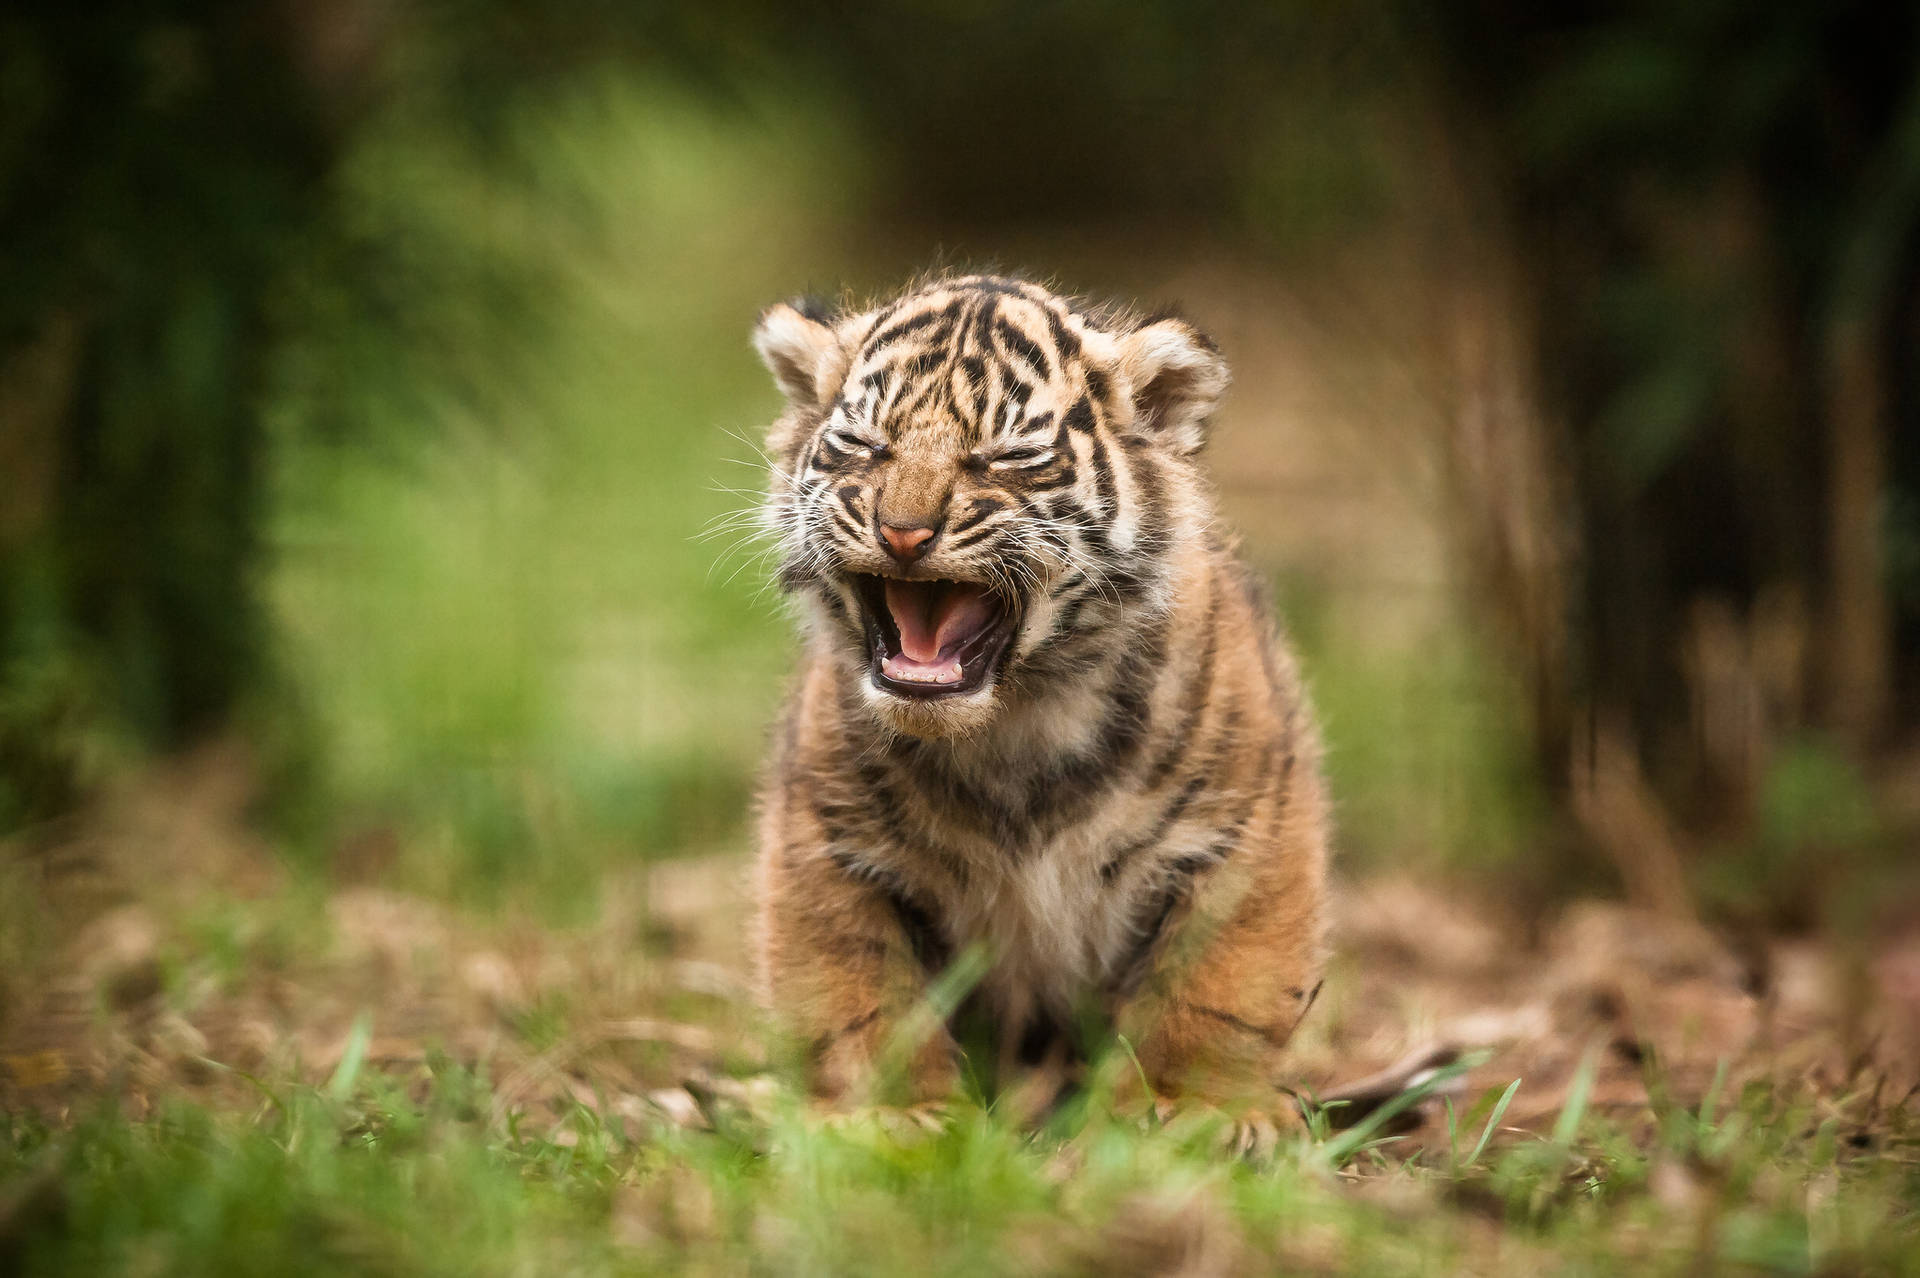 A tiger cub cries in the arms of its mother Wallpaper